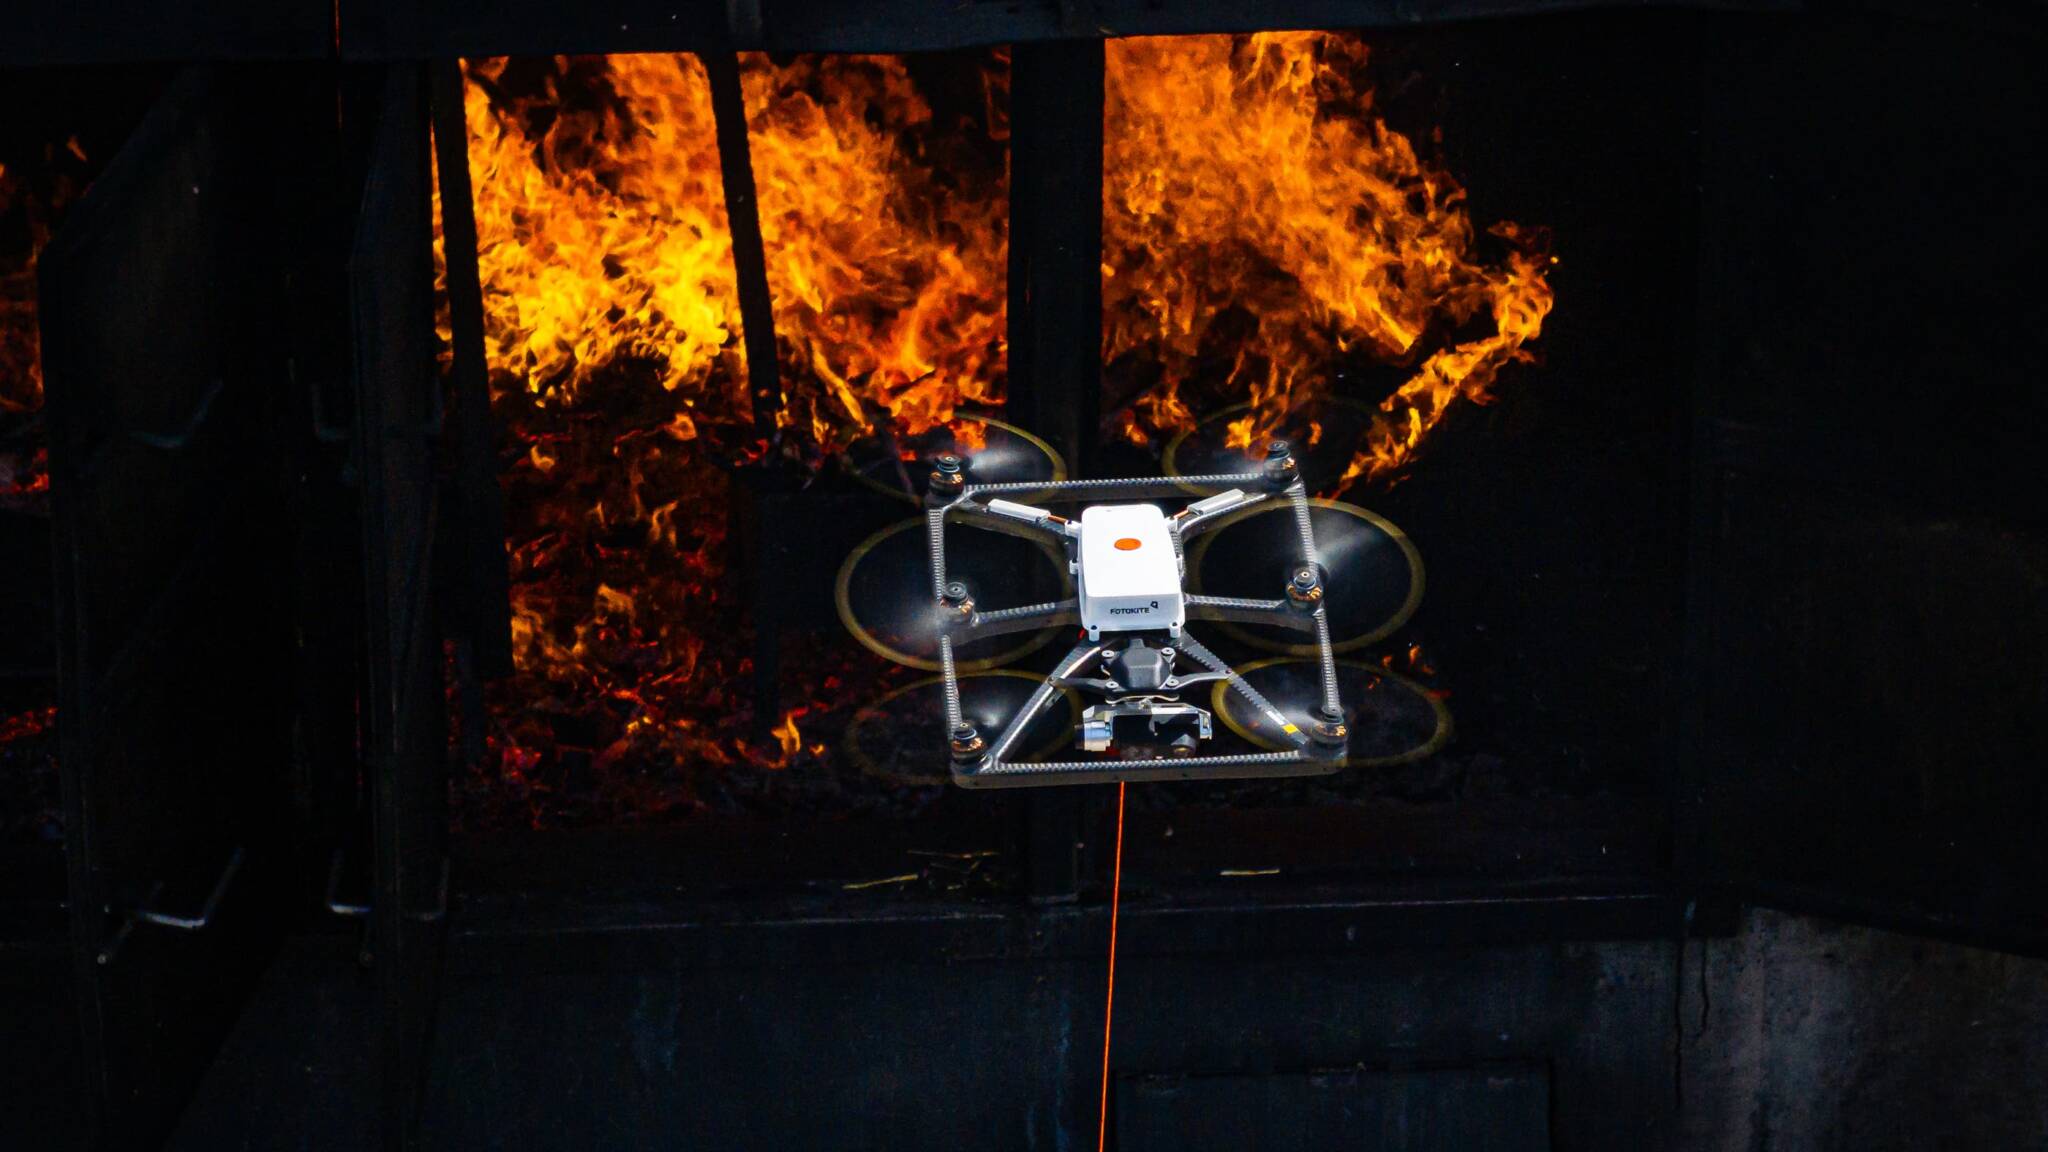 FAA Reauthorization, Tethered Drones, Public Security